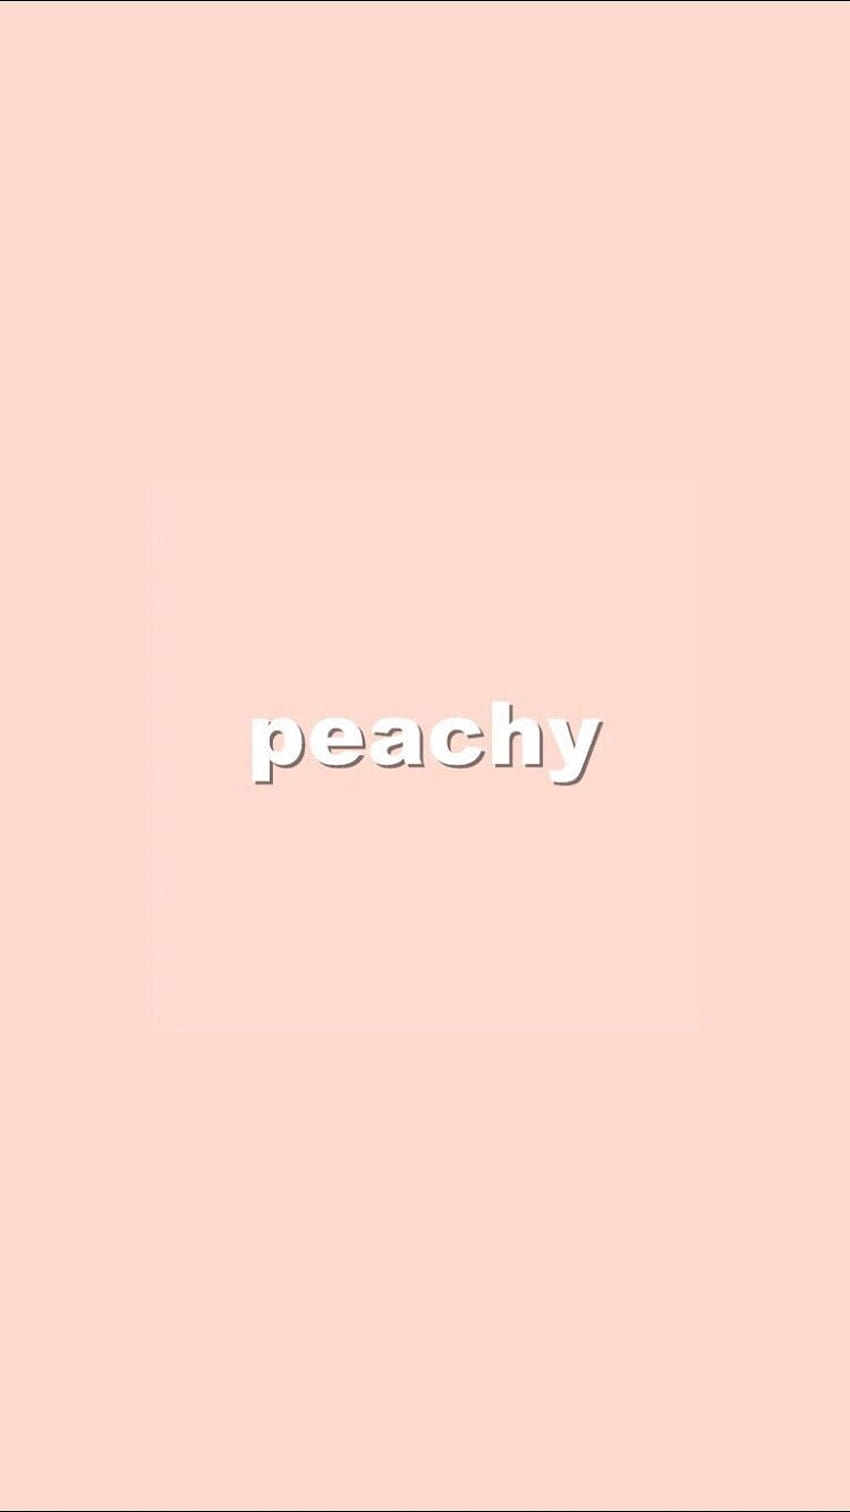 Just a peachy backgrounds, aesthetic peachy HD phone wallpaper